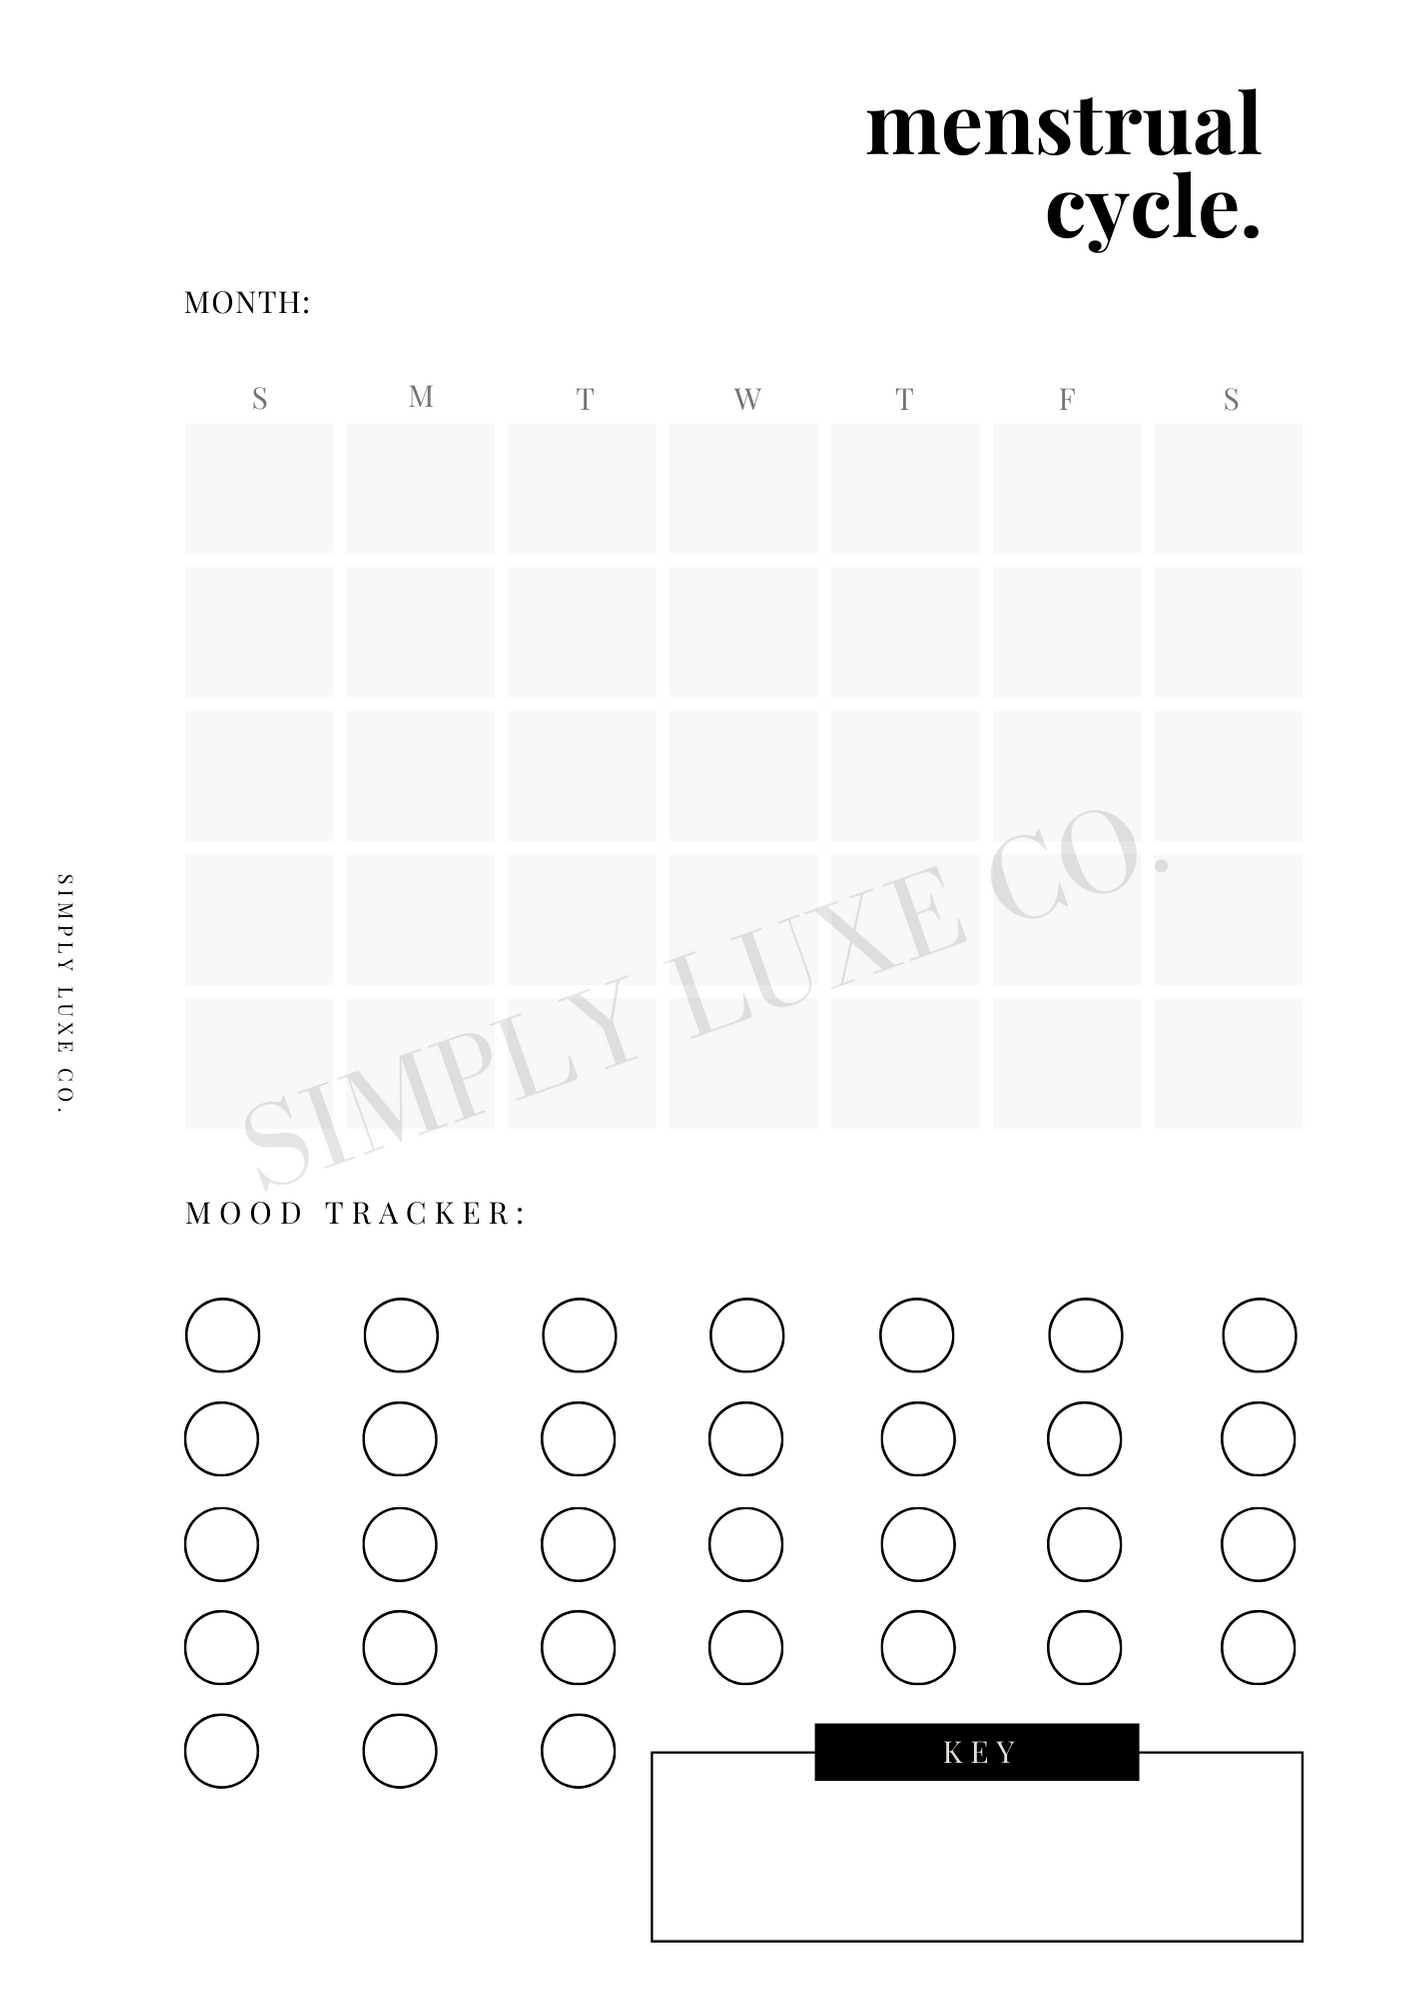 Menstrual Cycle Calendar Printable Inserts - Available in 2 colors